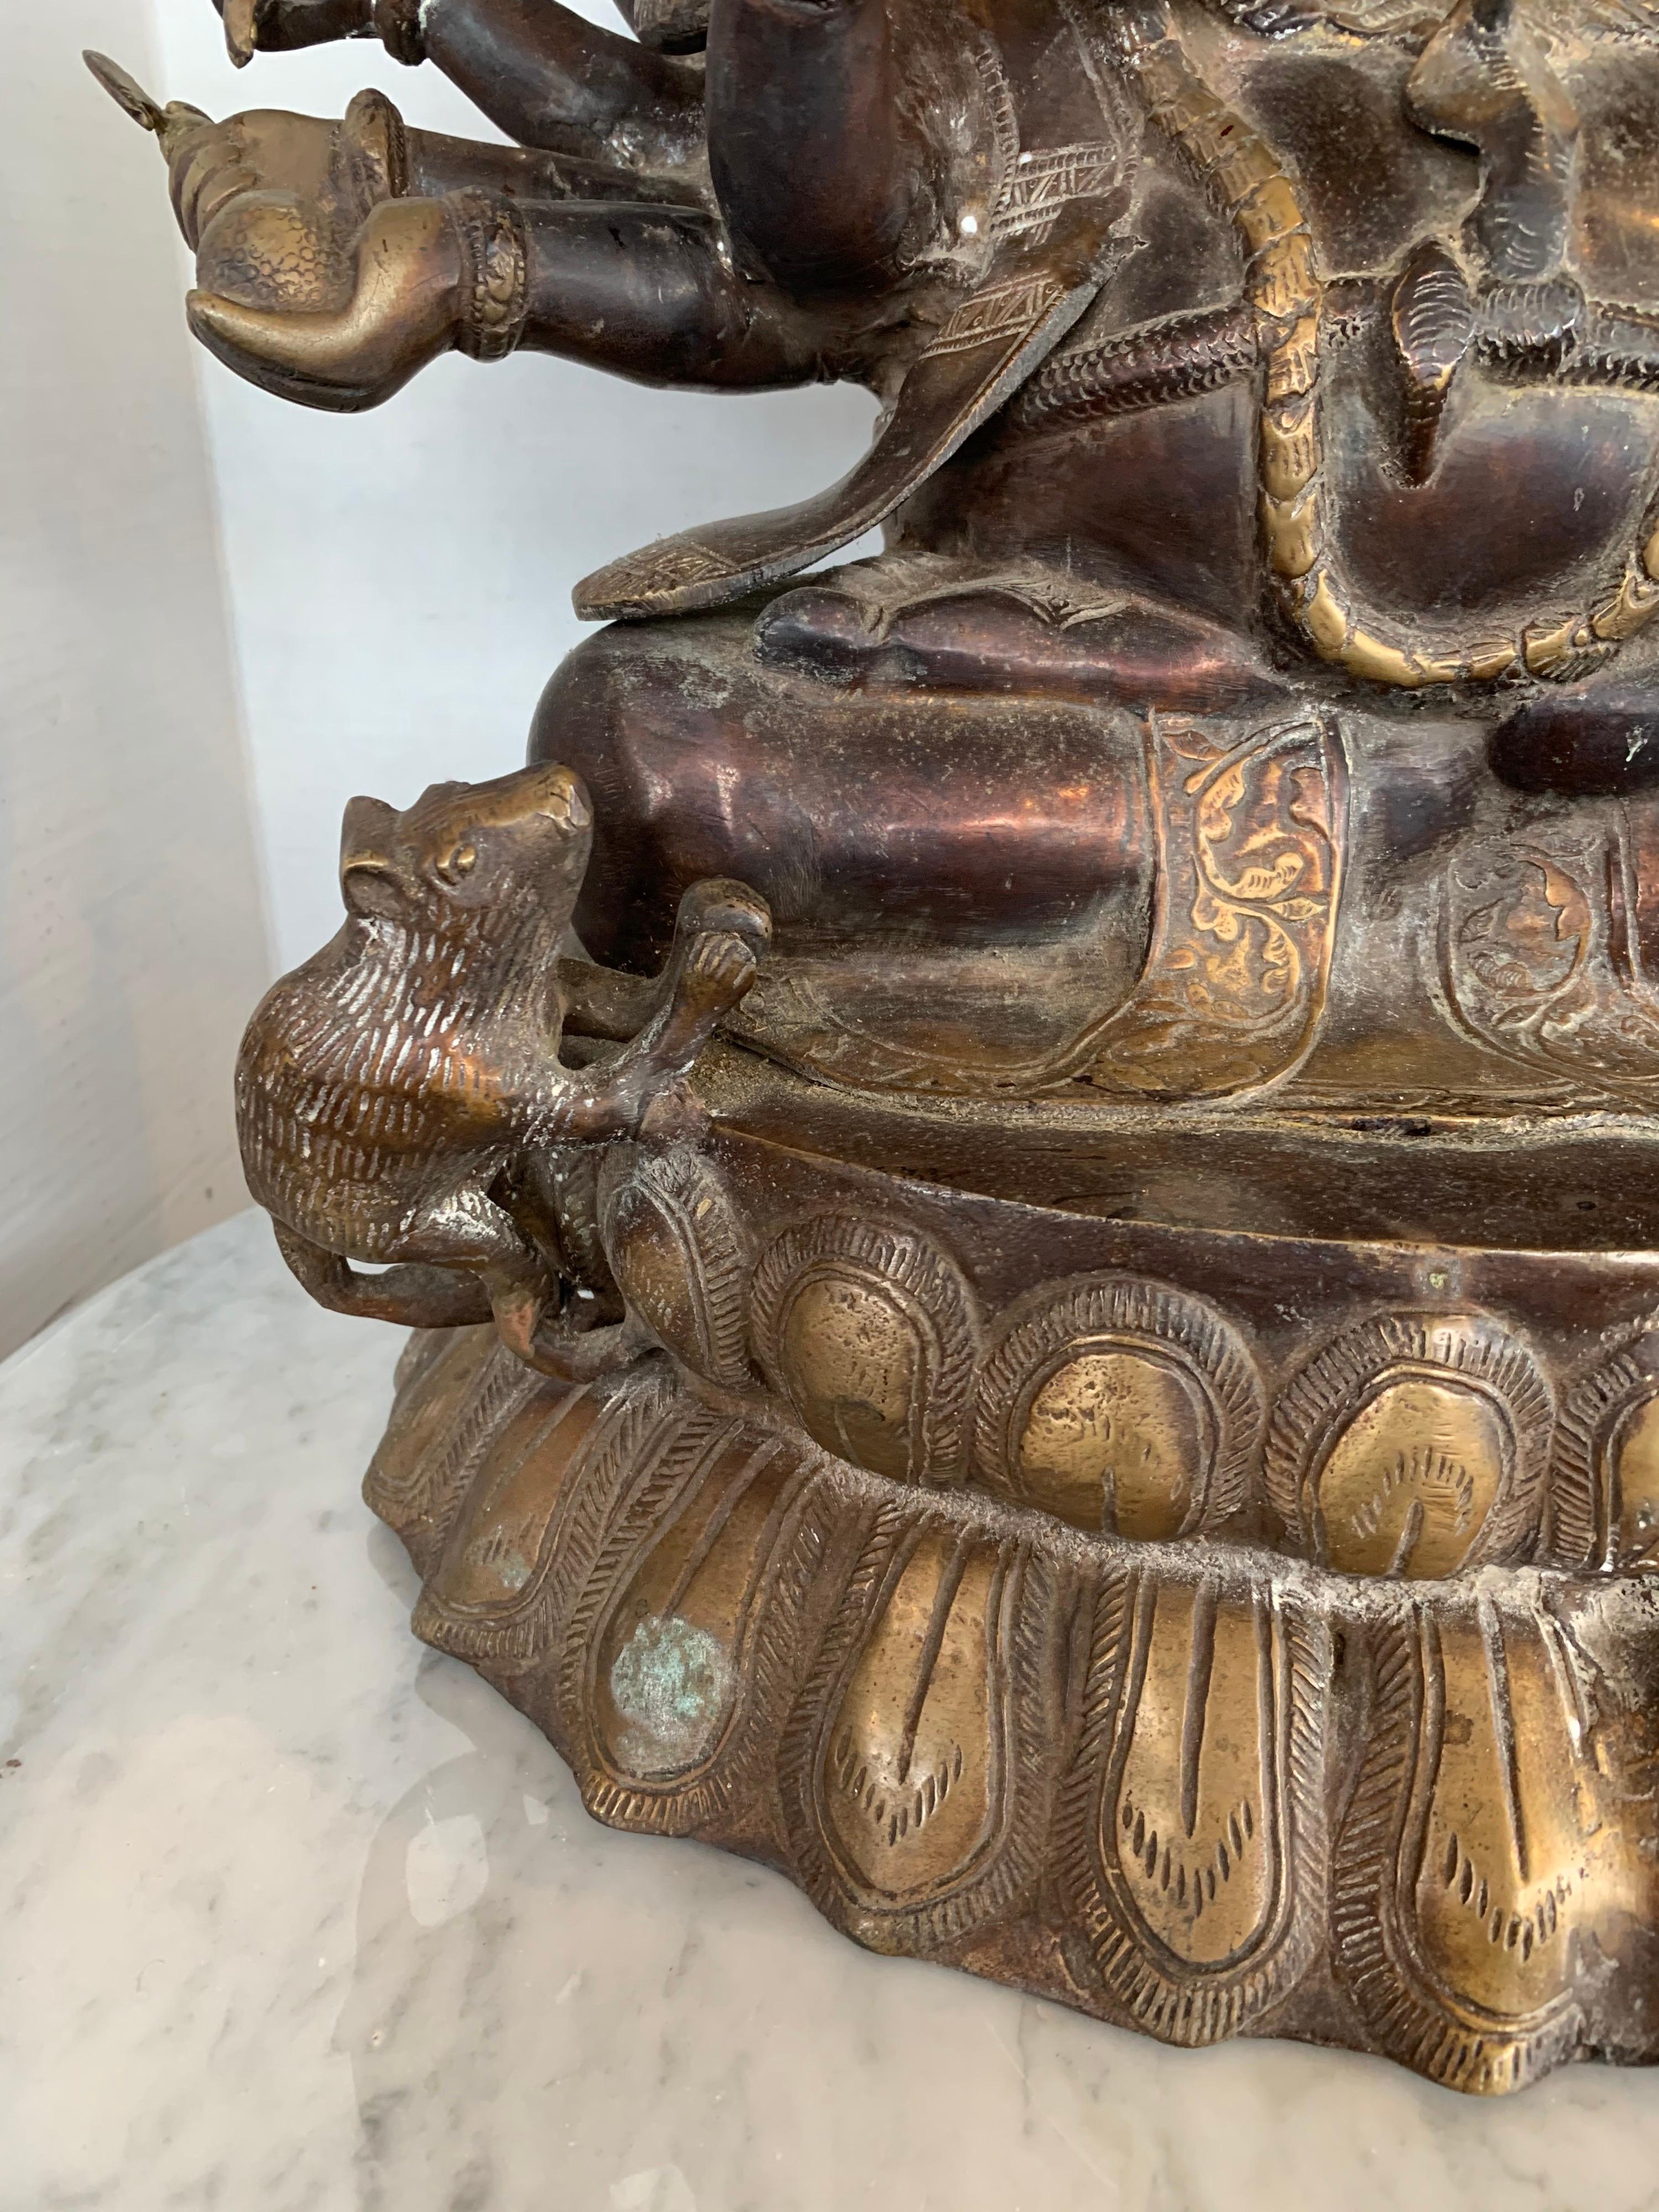 This is a stunning extra large bronze sculpture of Ganesha. This detailed sculpture depicts Ganesha, the Hindu god of success and luck with a rat at his feet. He symbolizes all-pervasiveness. He is elaborately dressed and holding a unique treasure